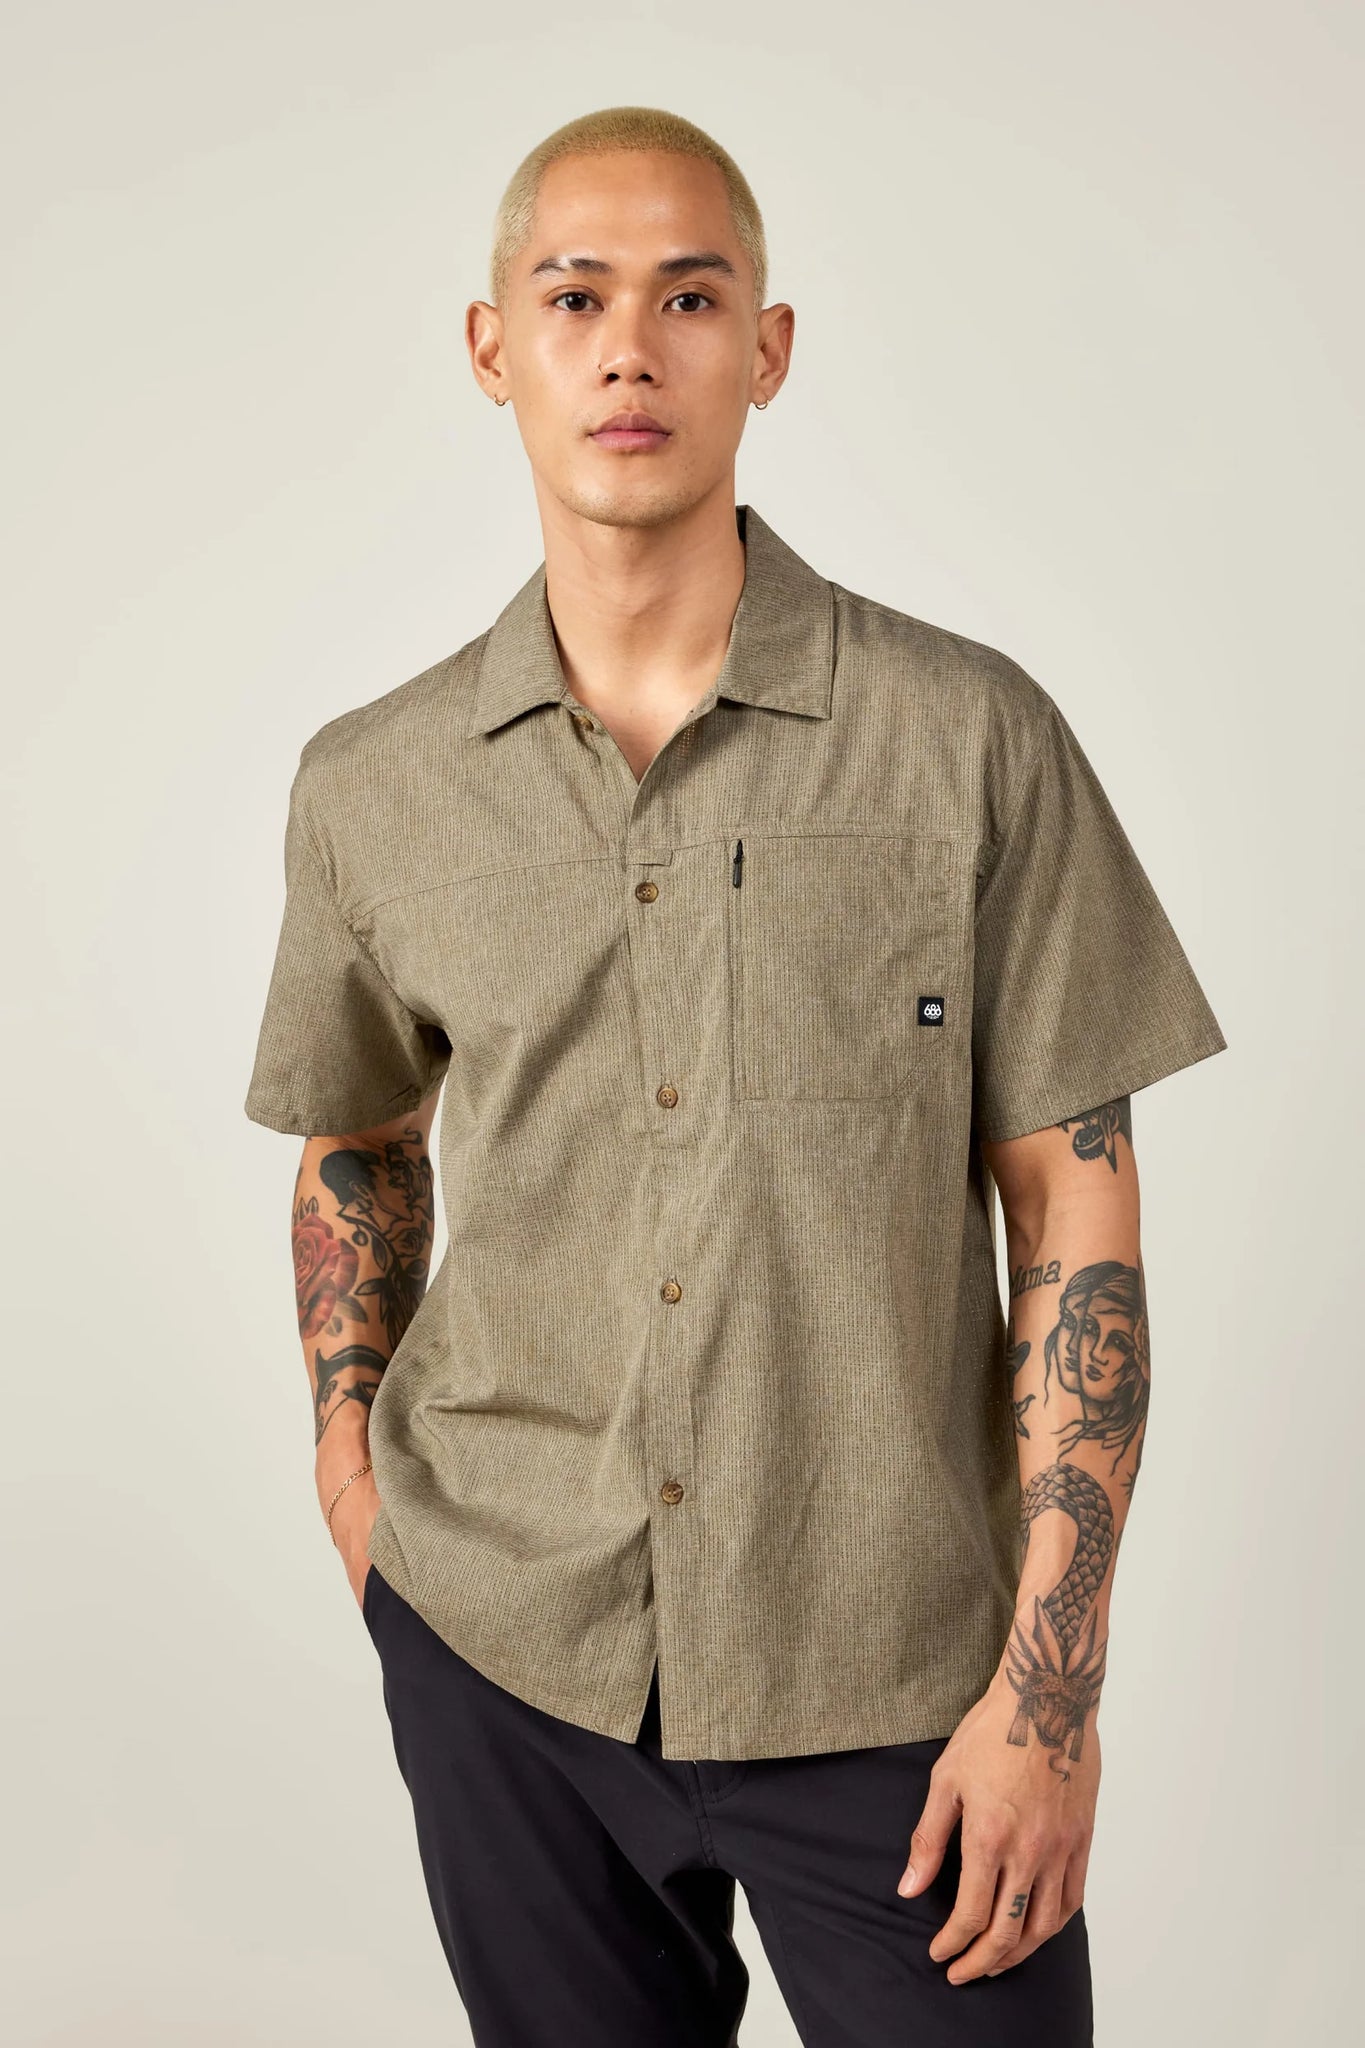 CANOPY PERFORATED BUTTON UP- HEATHER DUSTY FATIGUE